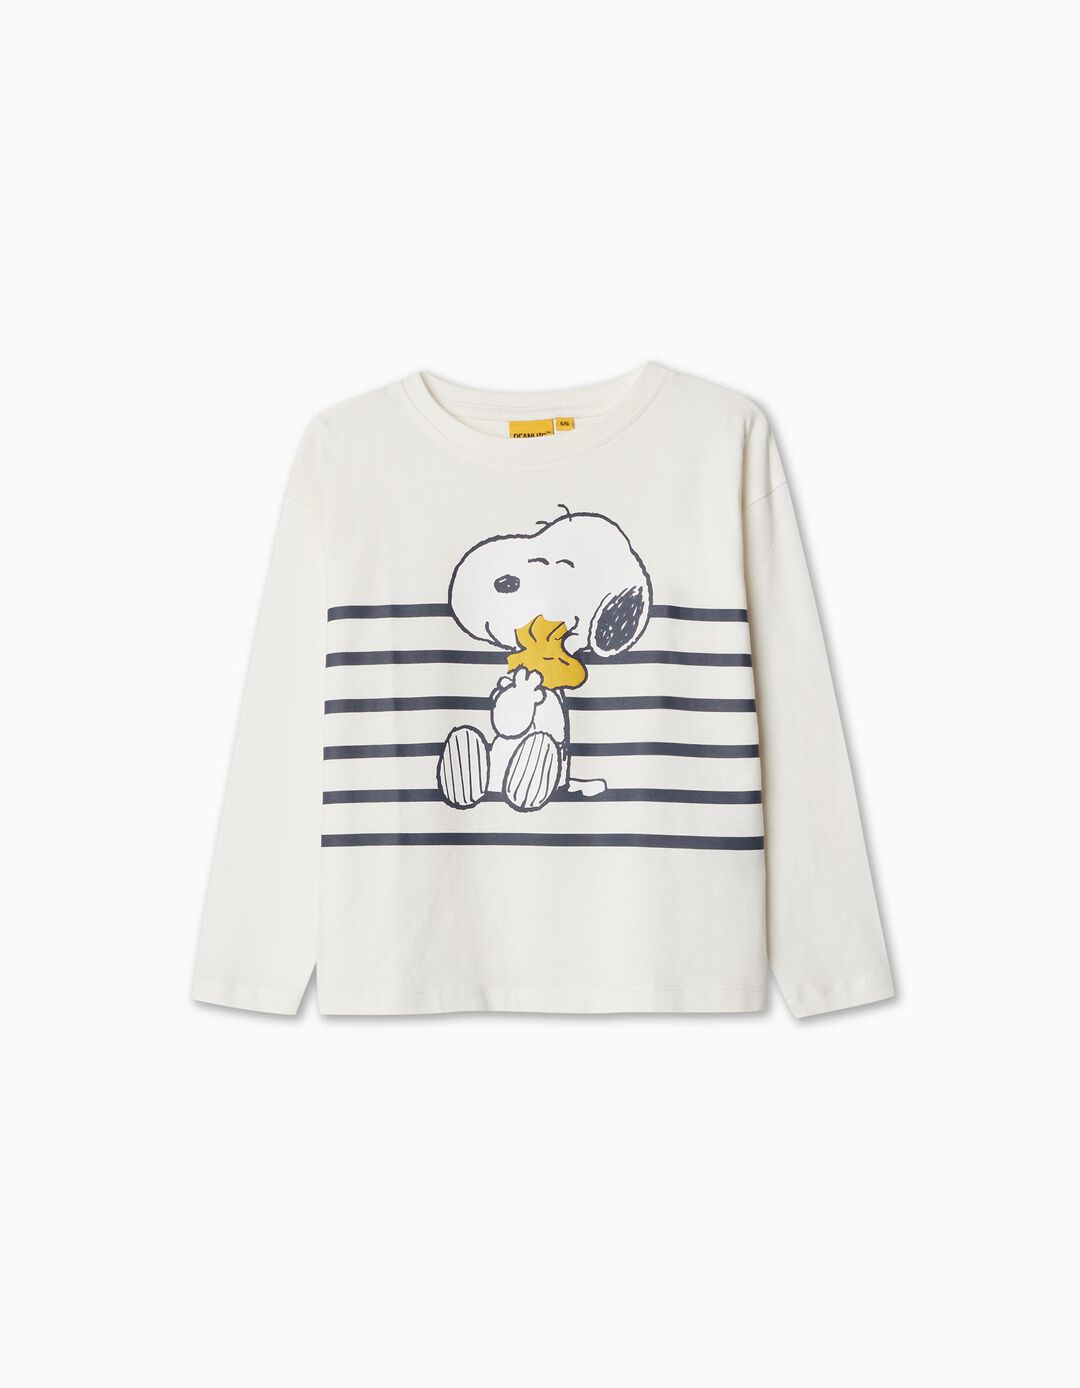 'Snoopy' Long Sleeve T-shirt, White